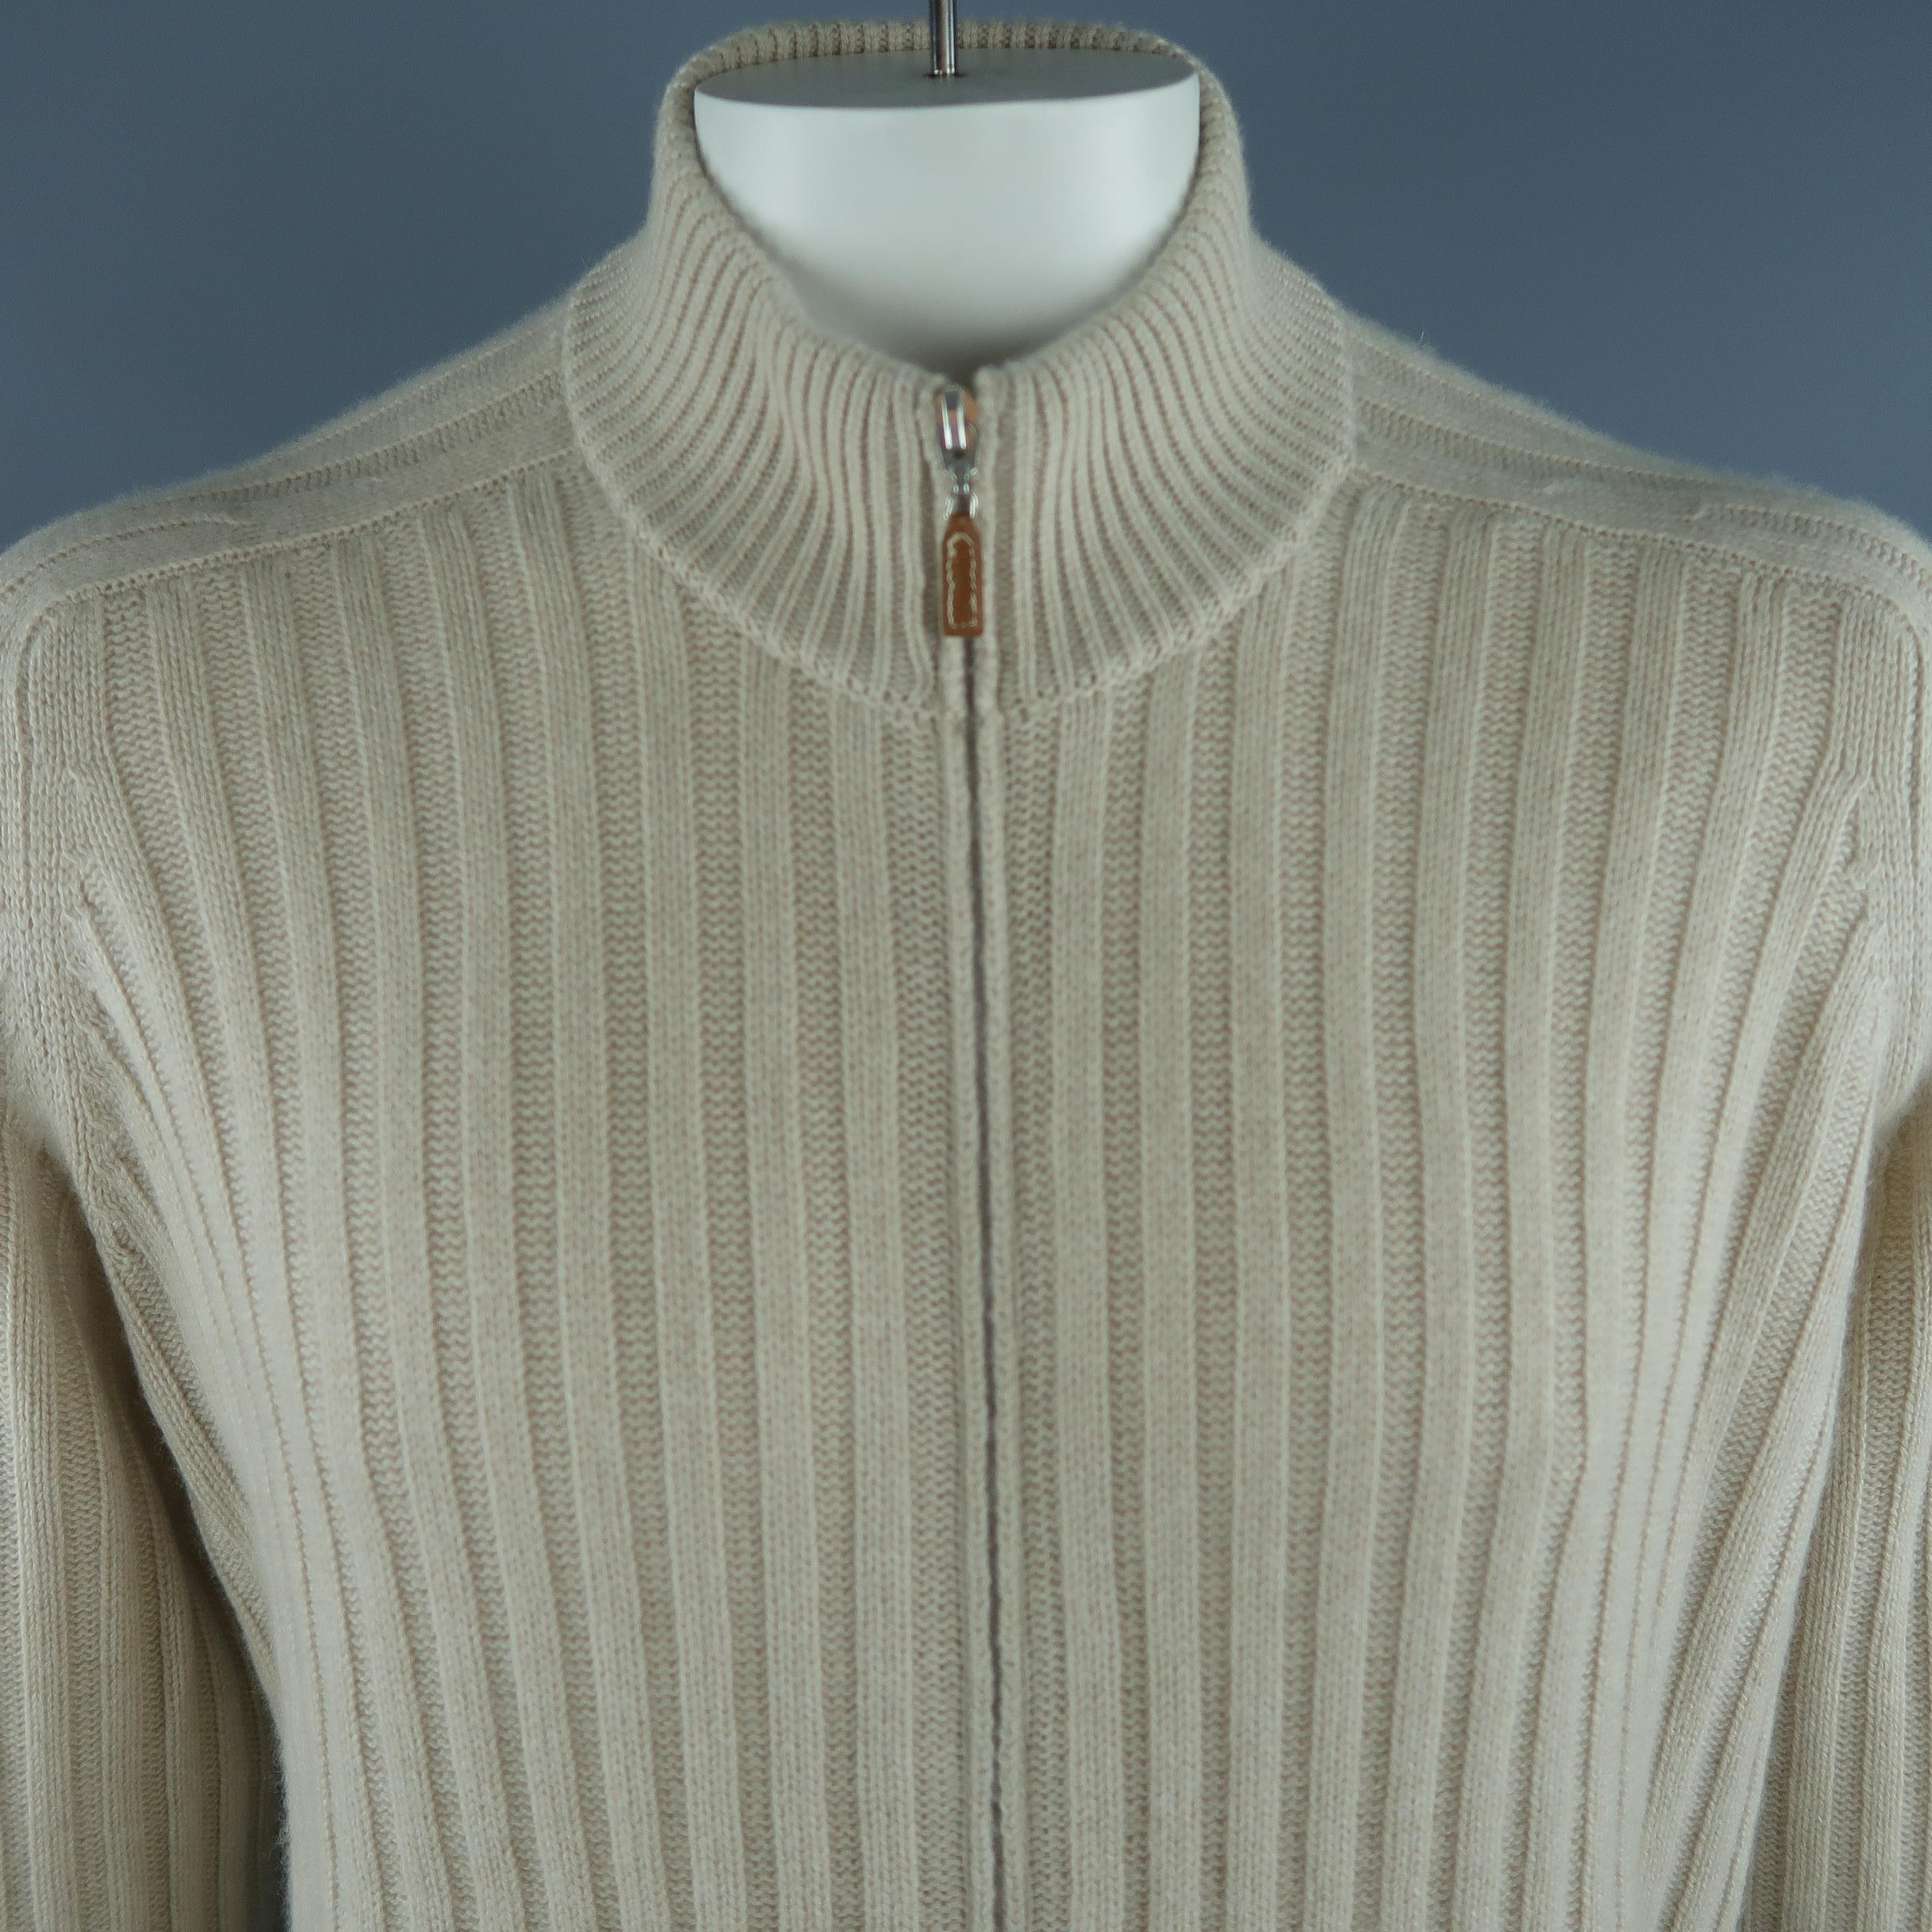 BRUNELLO CUCINELLI  cardigan come in beige tone in knitted cashmere material, with zip up front, front zip pockets, ribbed cuffs and waistband. Made in Italy.
 
New with Tags. One Pocket missing zipper pull.
Marked: 54 IT
 
Measurements:
 
Shoulder: